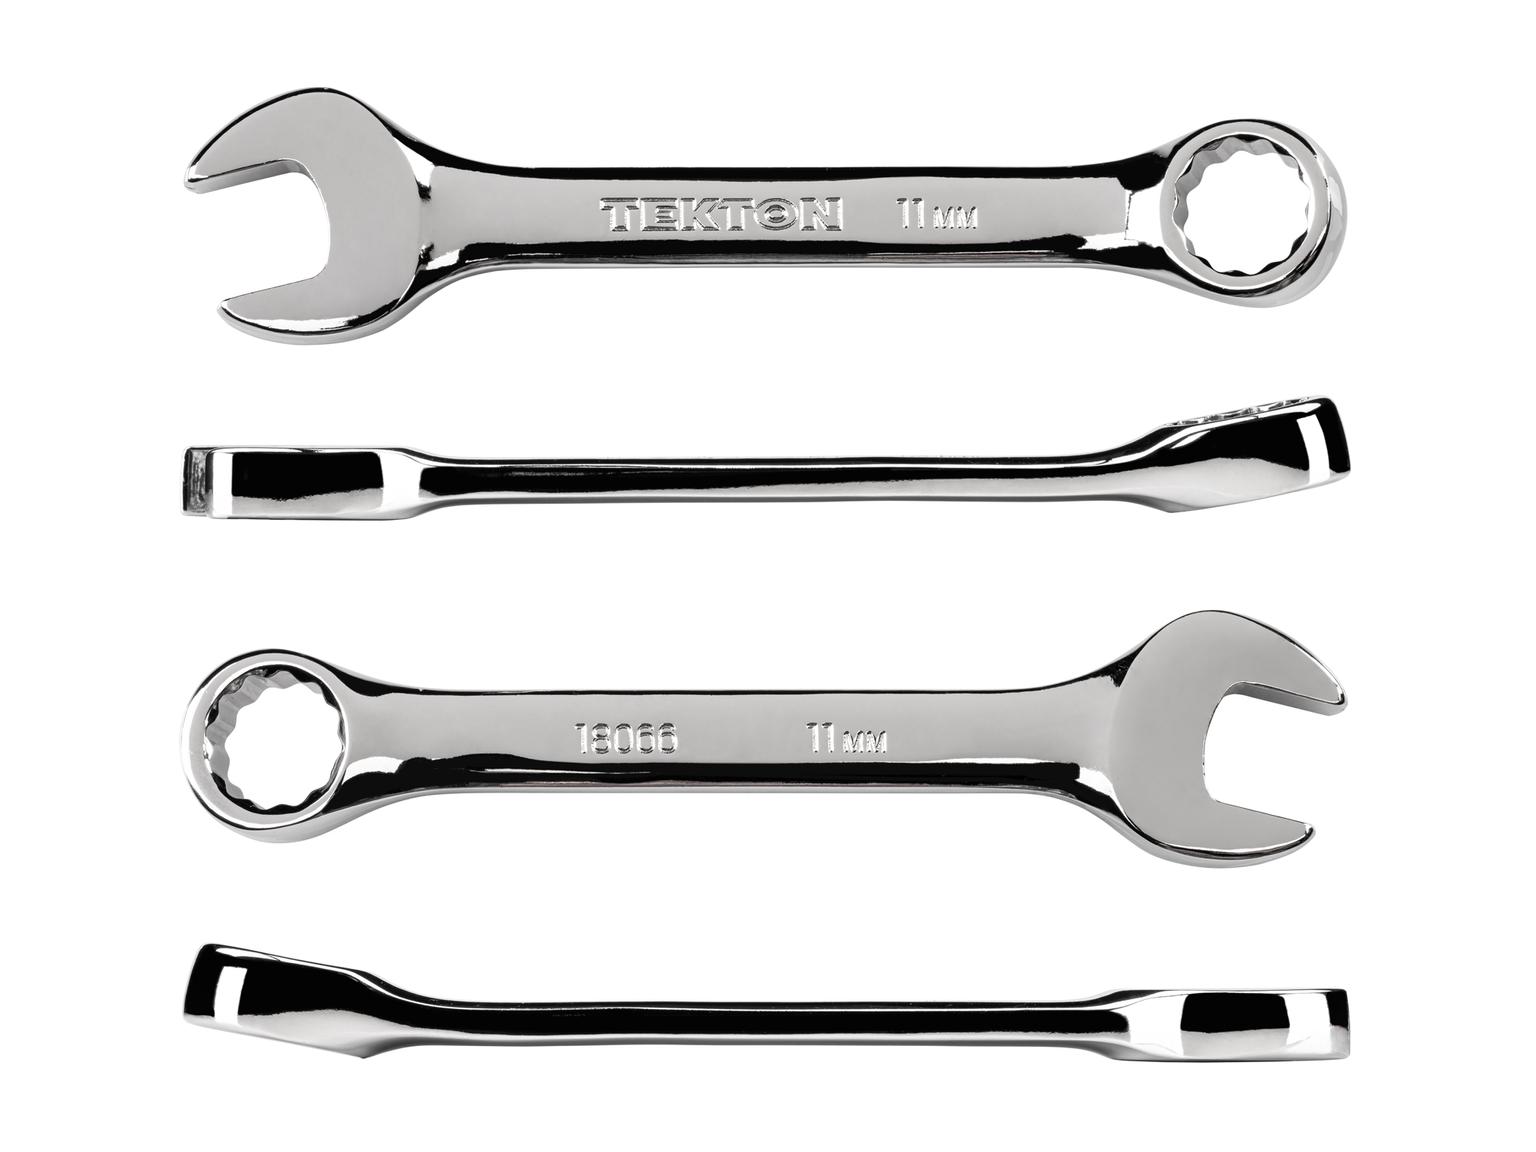 TEKTON 18066-T 11 mm Stubby Combination Wrench